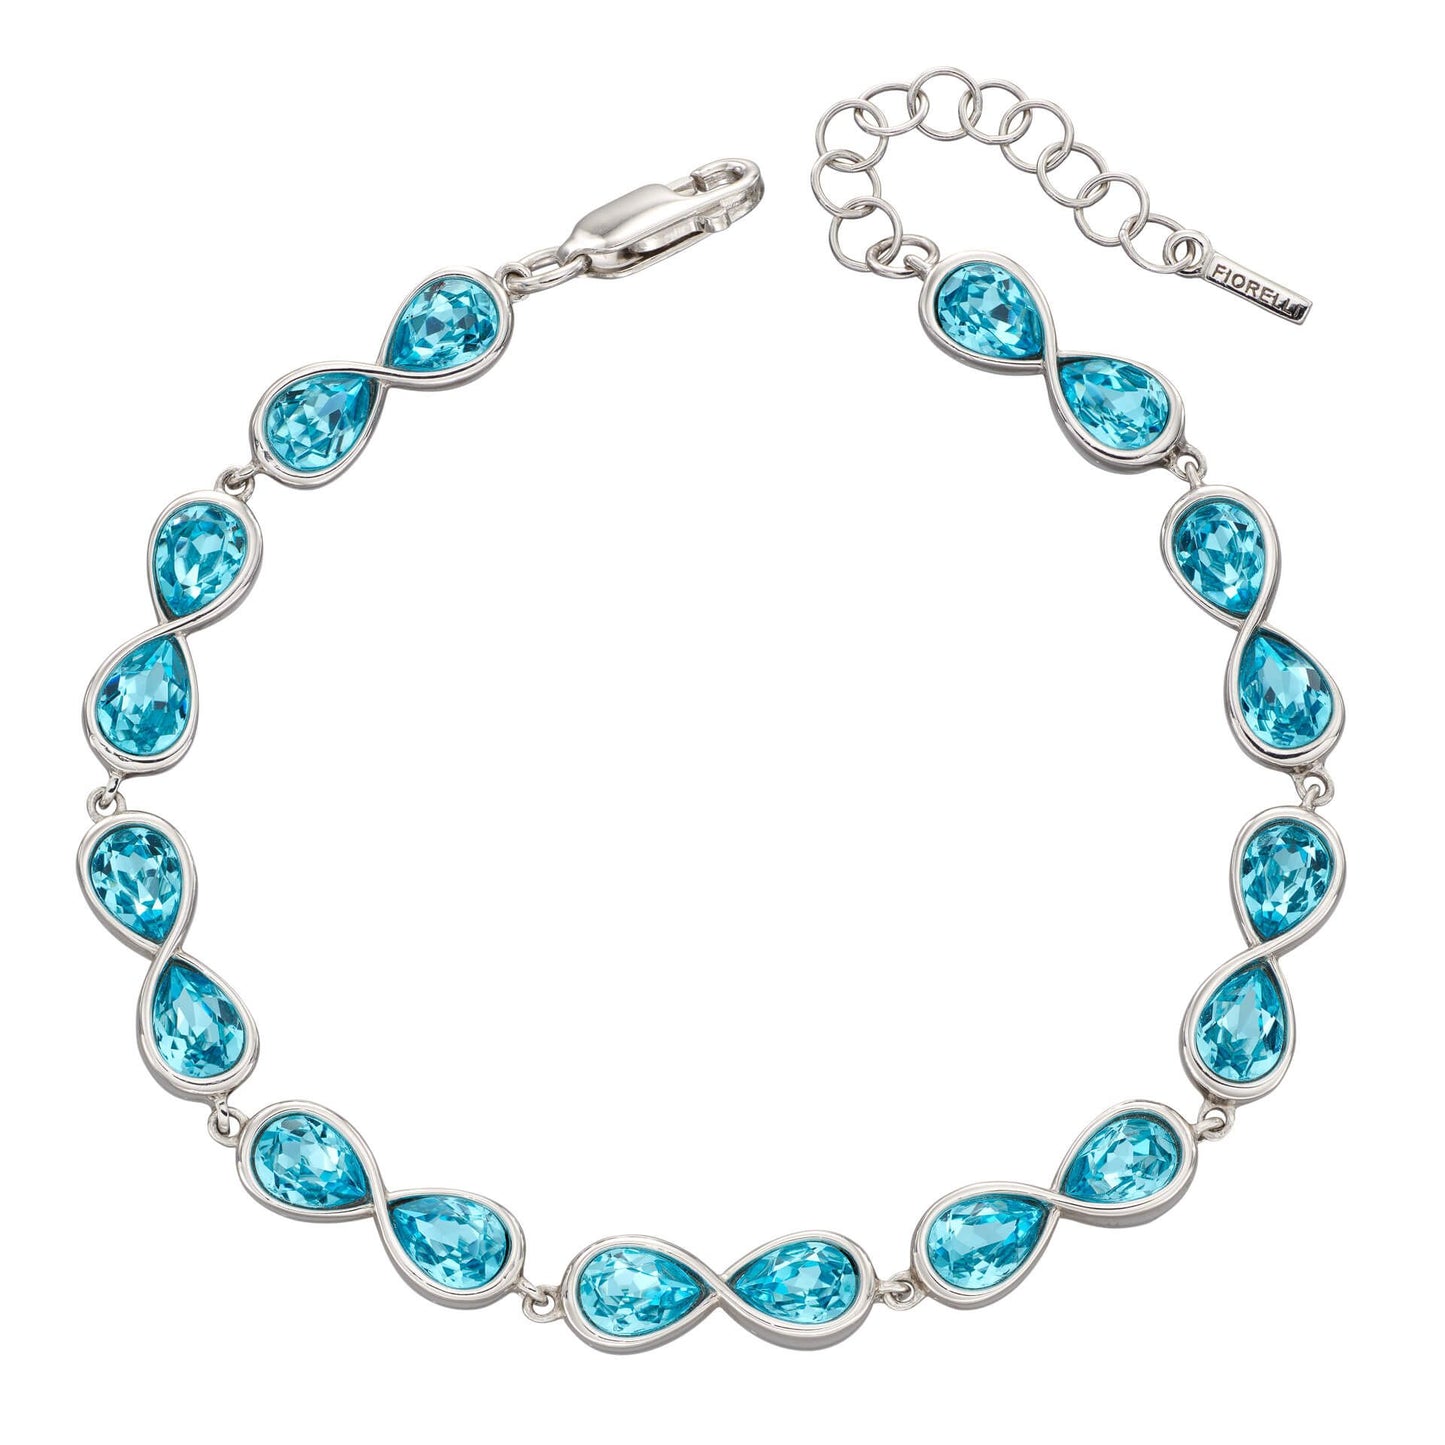 Fiorelli silver and blue crystal bracelet